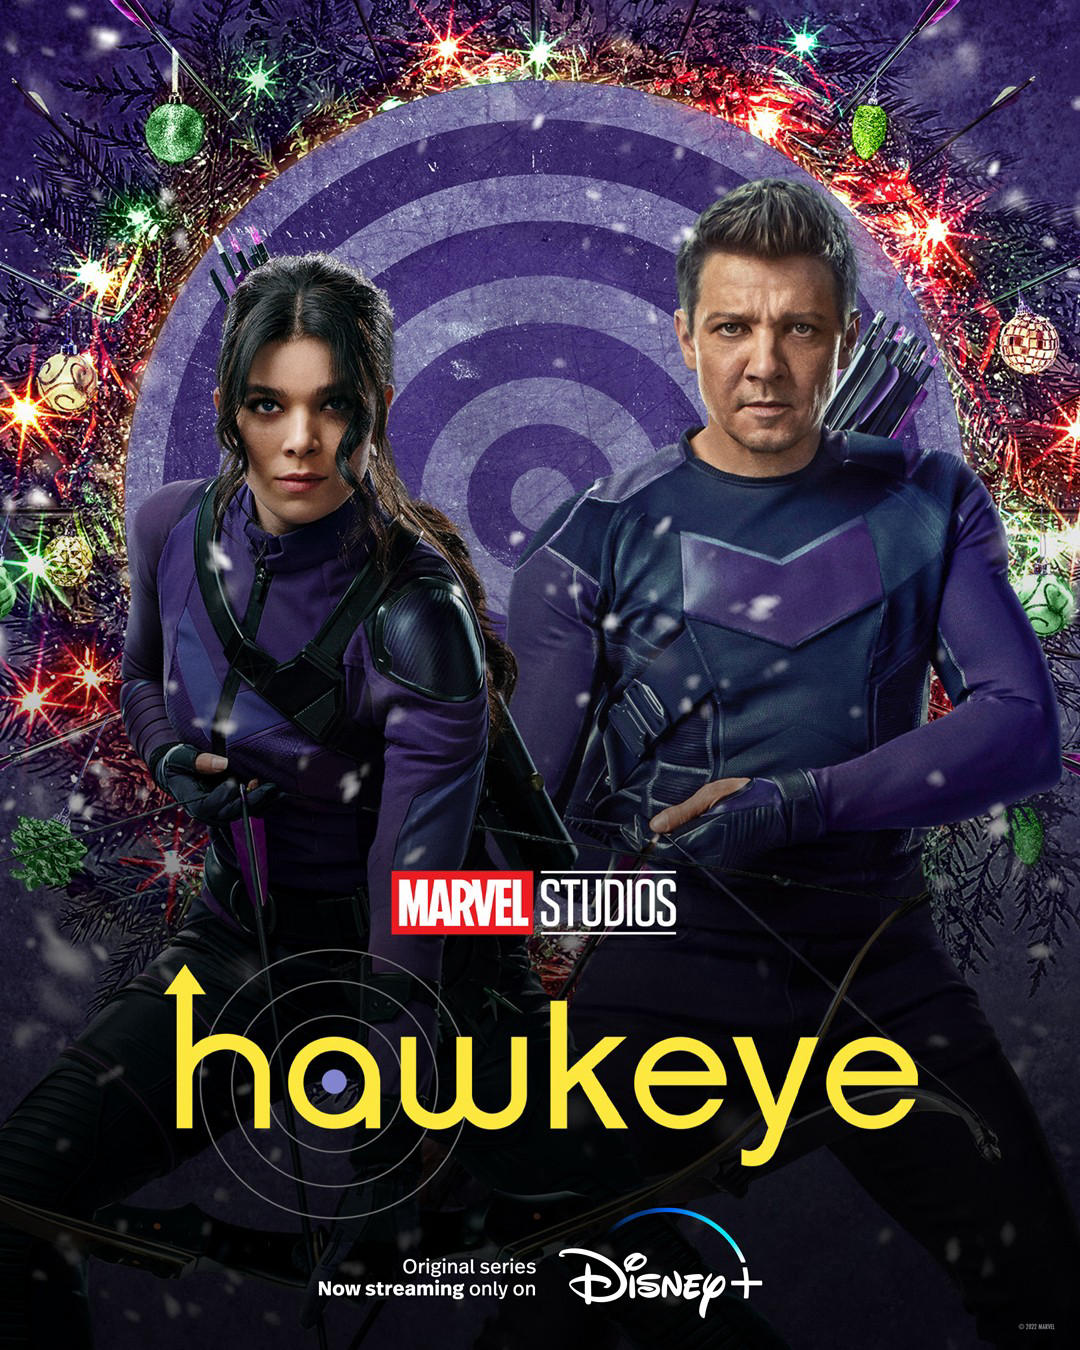 Marvel Studios - Relive every epic moment of #Hawkeye this holiday season